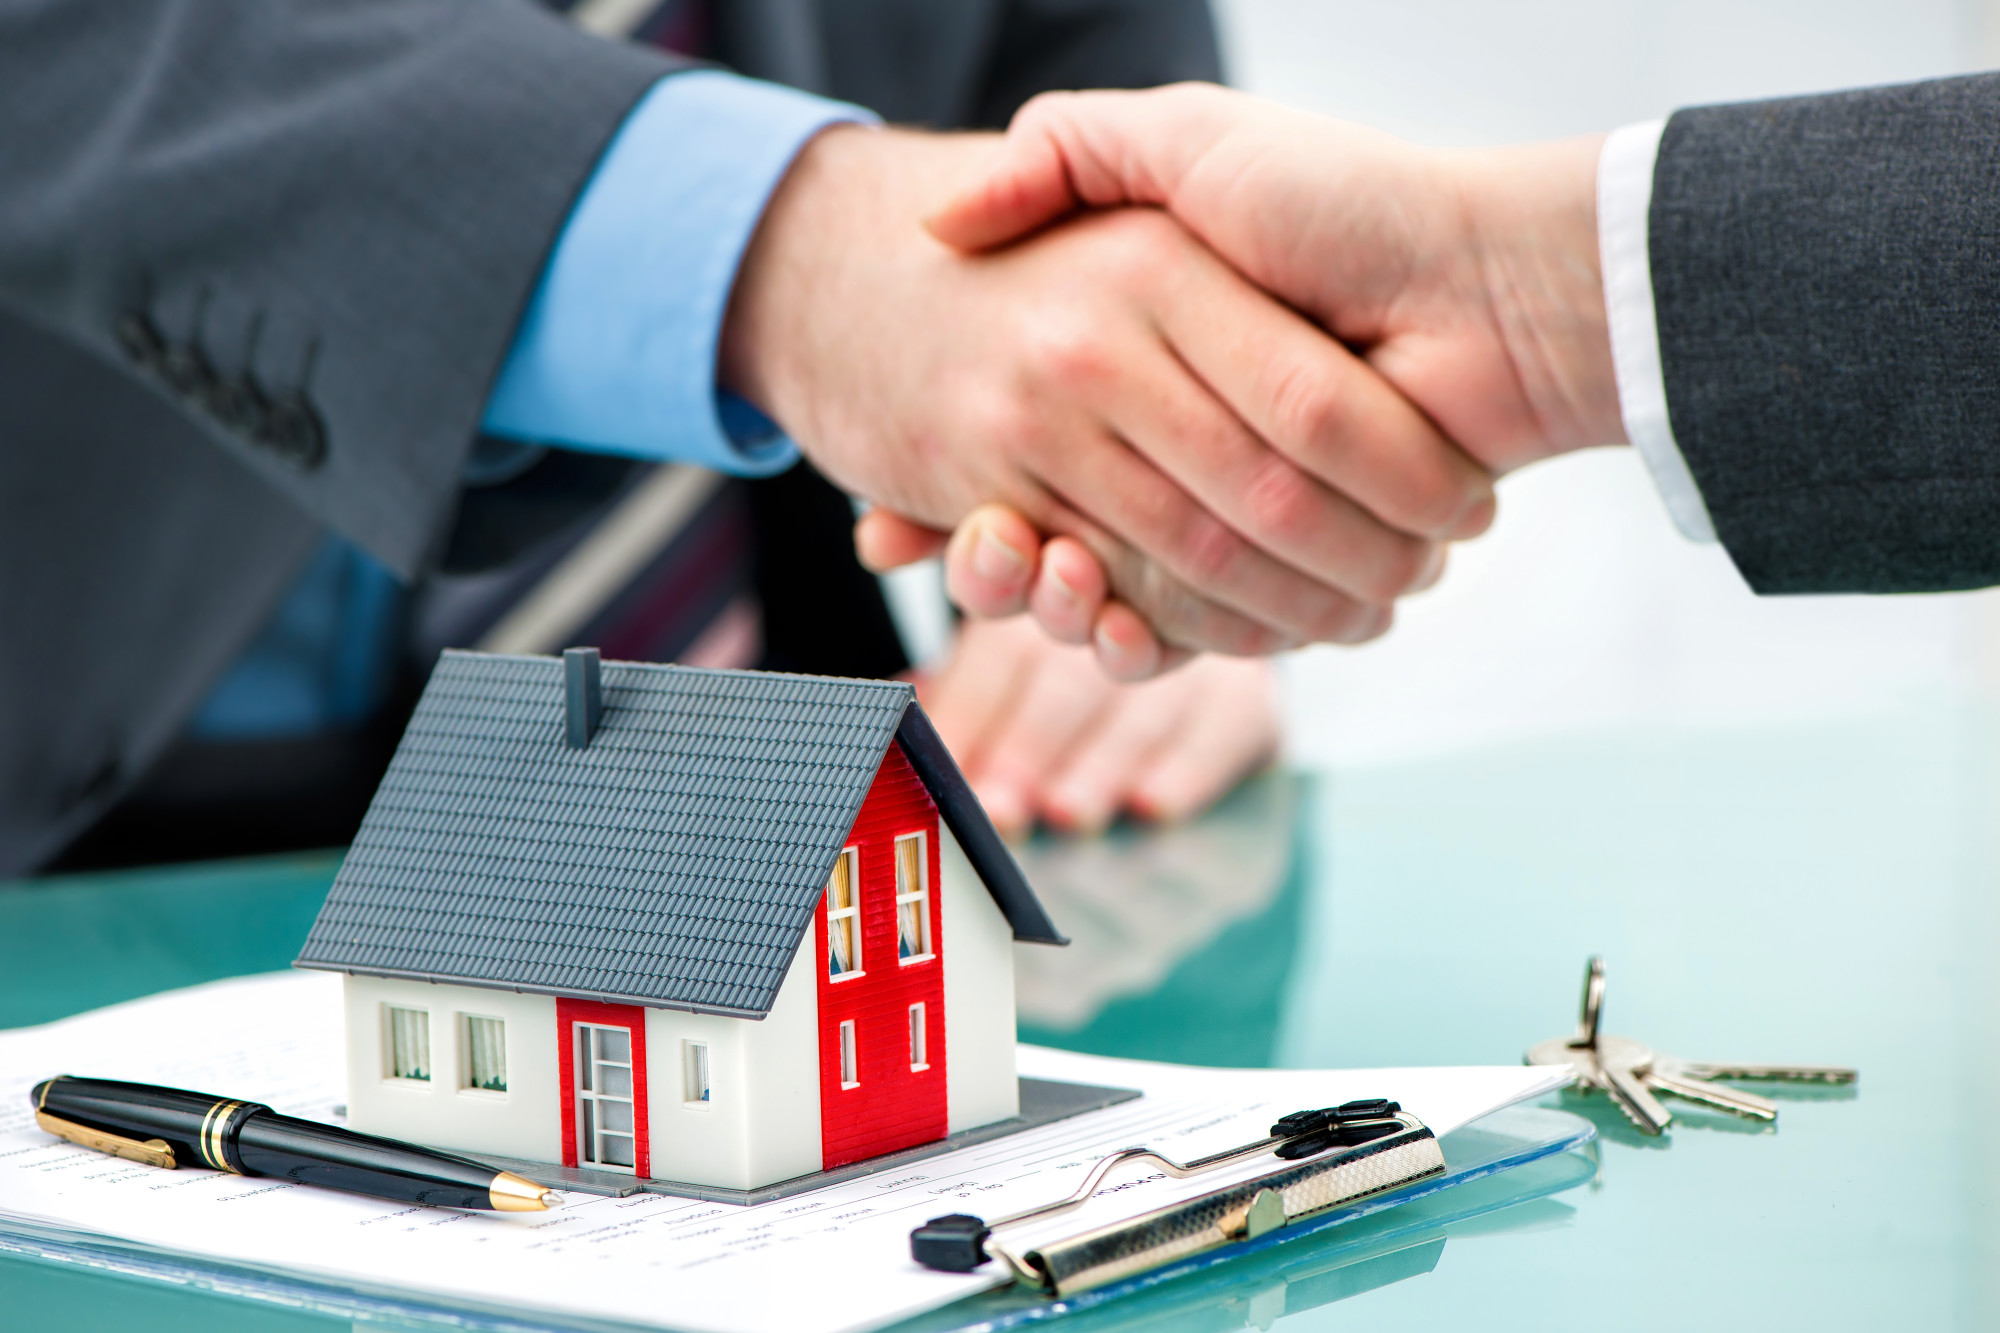 The Benefits of Hiring a Property Management Company